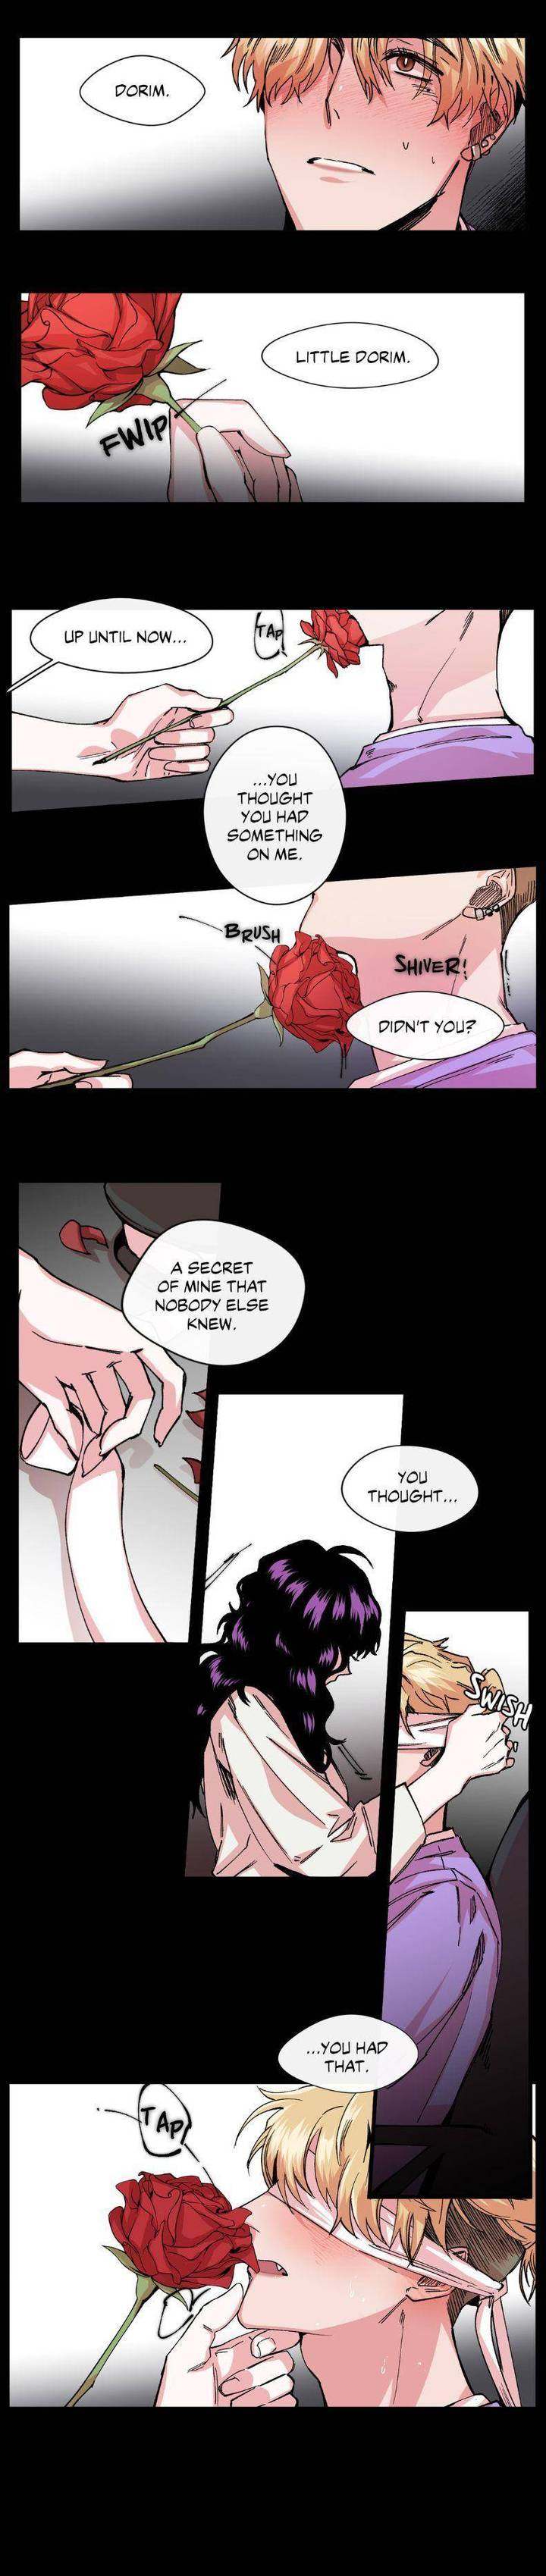 S Flower - Chapter 7 Page 1